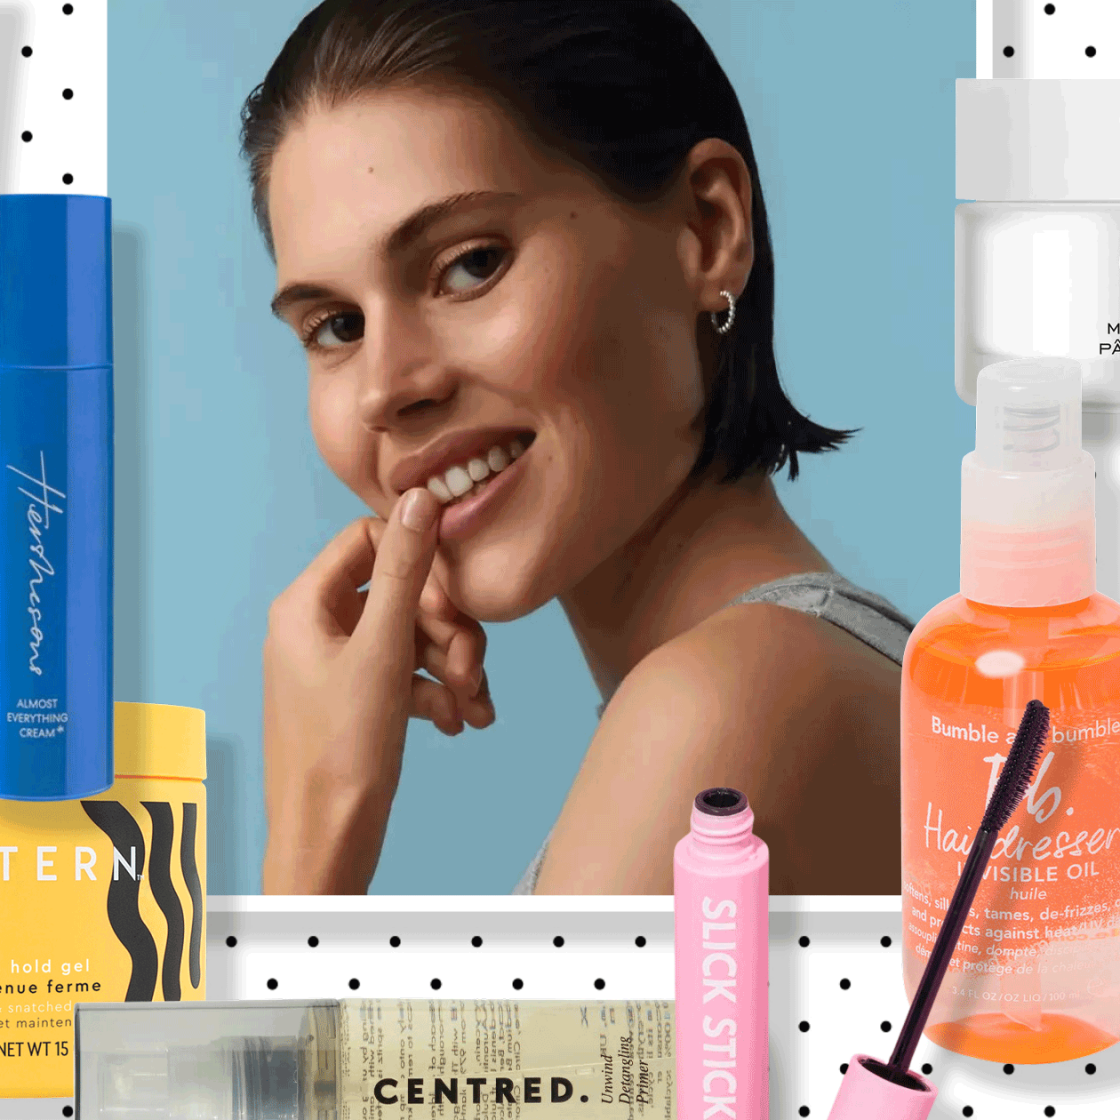 The Slicked Back Hairstyle That Works For Anything (+ The Products